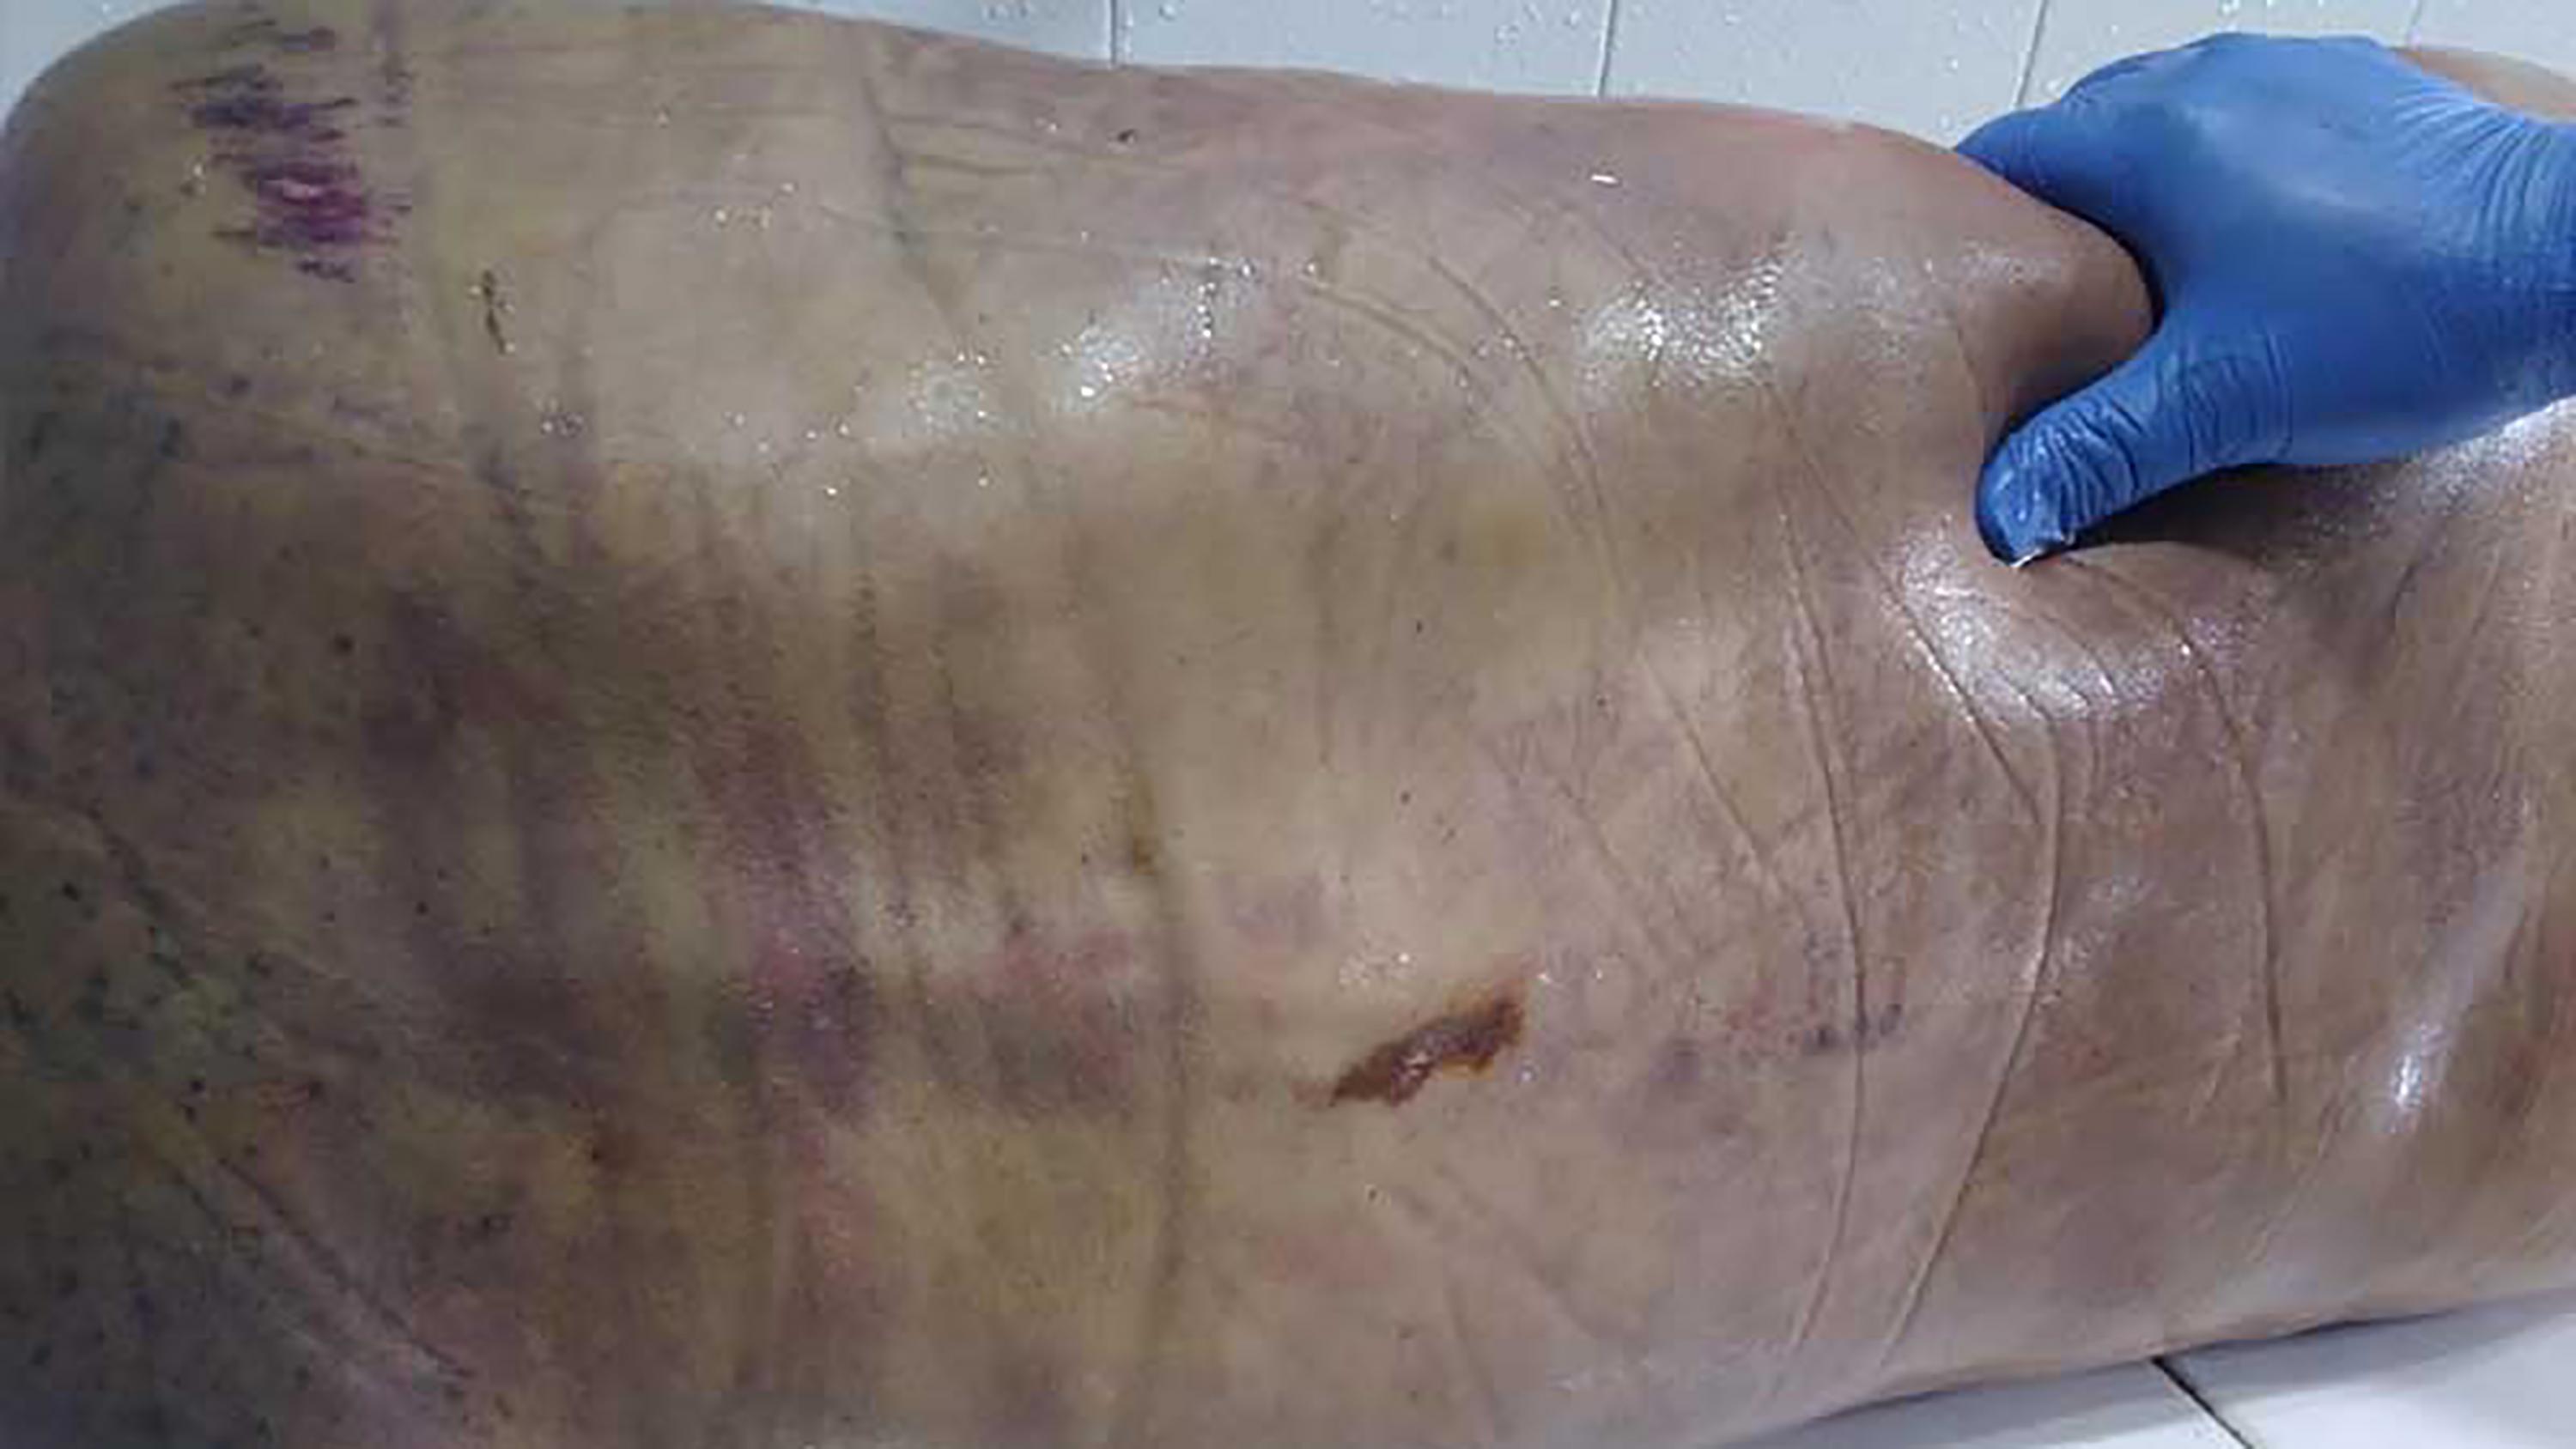 The body of Marco Tulio Castillo Reyes, a 38-year-old cab driver, showed signs of the beatings he received in Izalco and Quezaltepeque prisons. The family photographed the body to document the condition it was in when they received it from medical examiner’s office. Photo El Faro